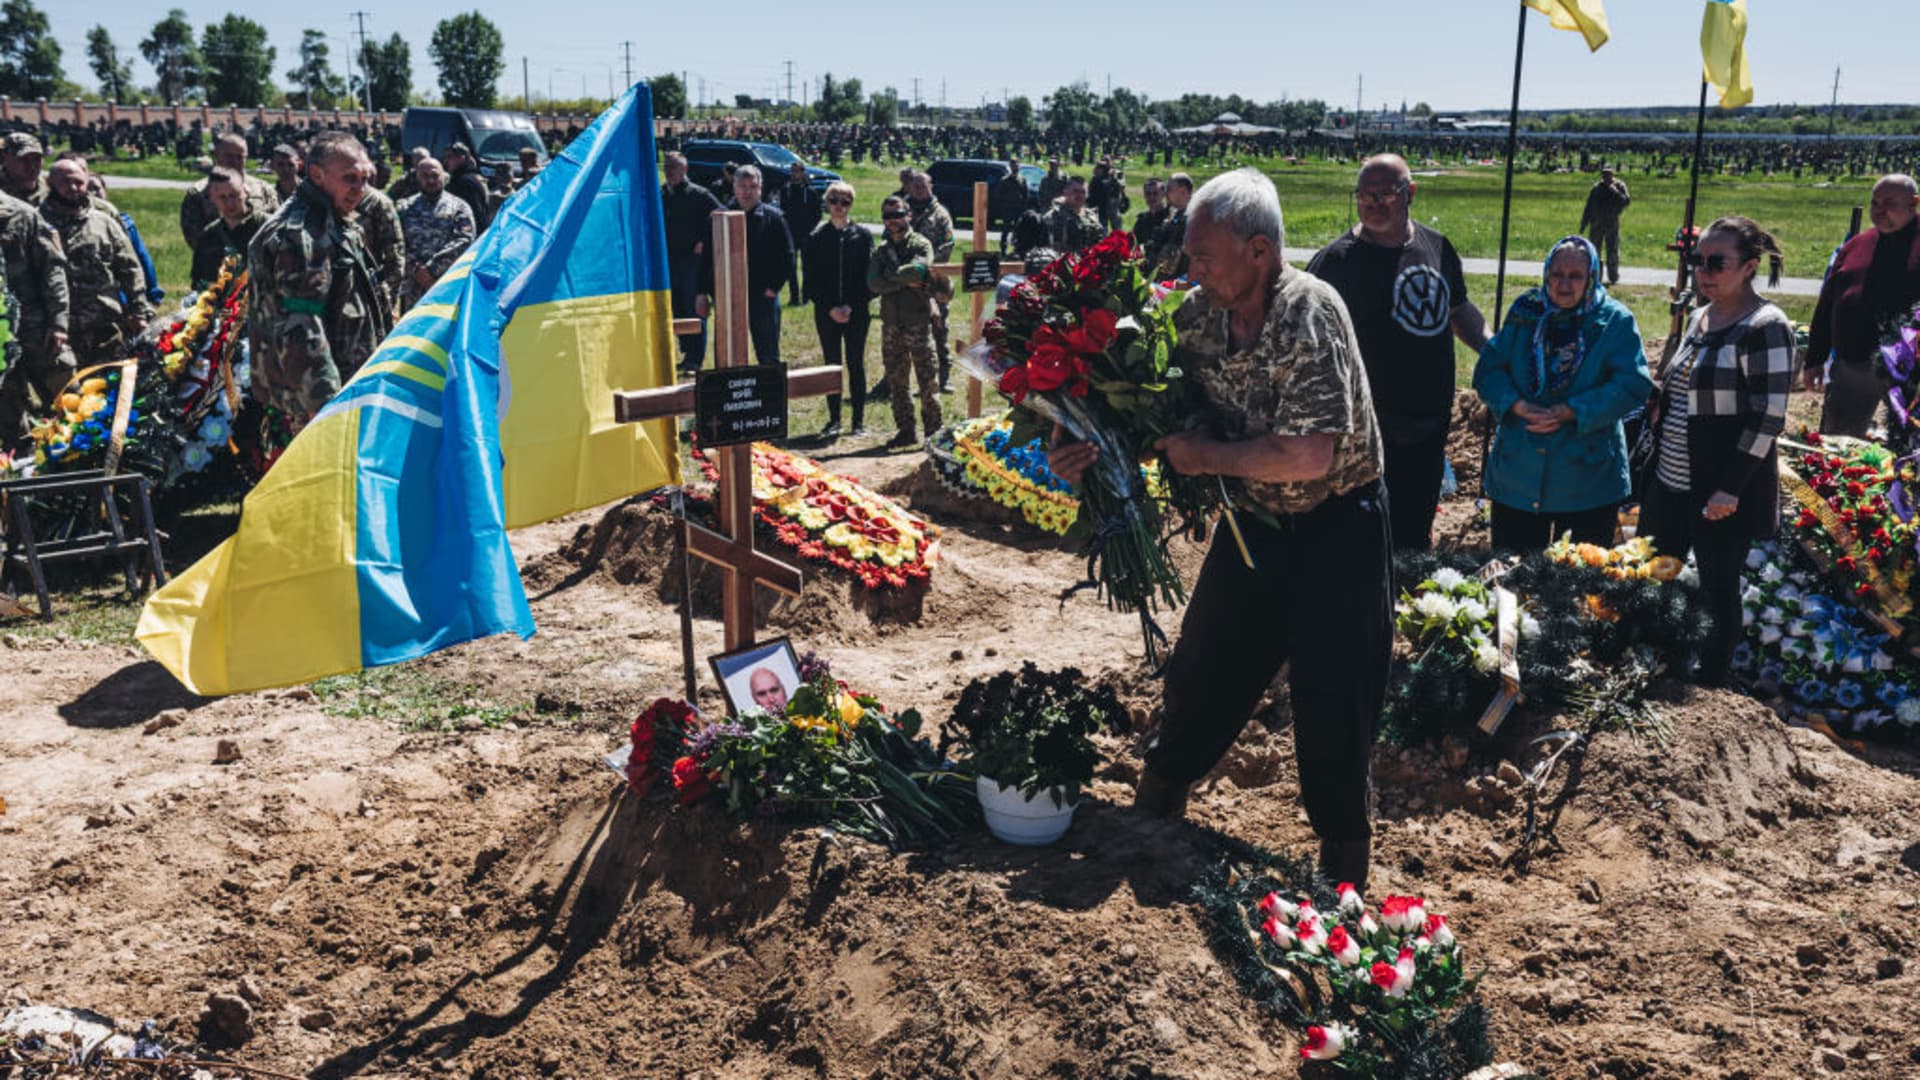 People attend the funeral of the fallen Ukrainian soldier in a cemetery of Kharkiv, Ukraine on May 7, 2022.